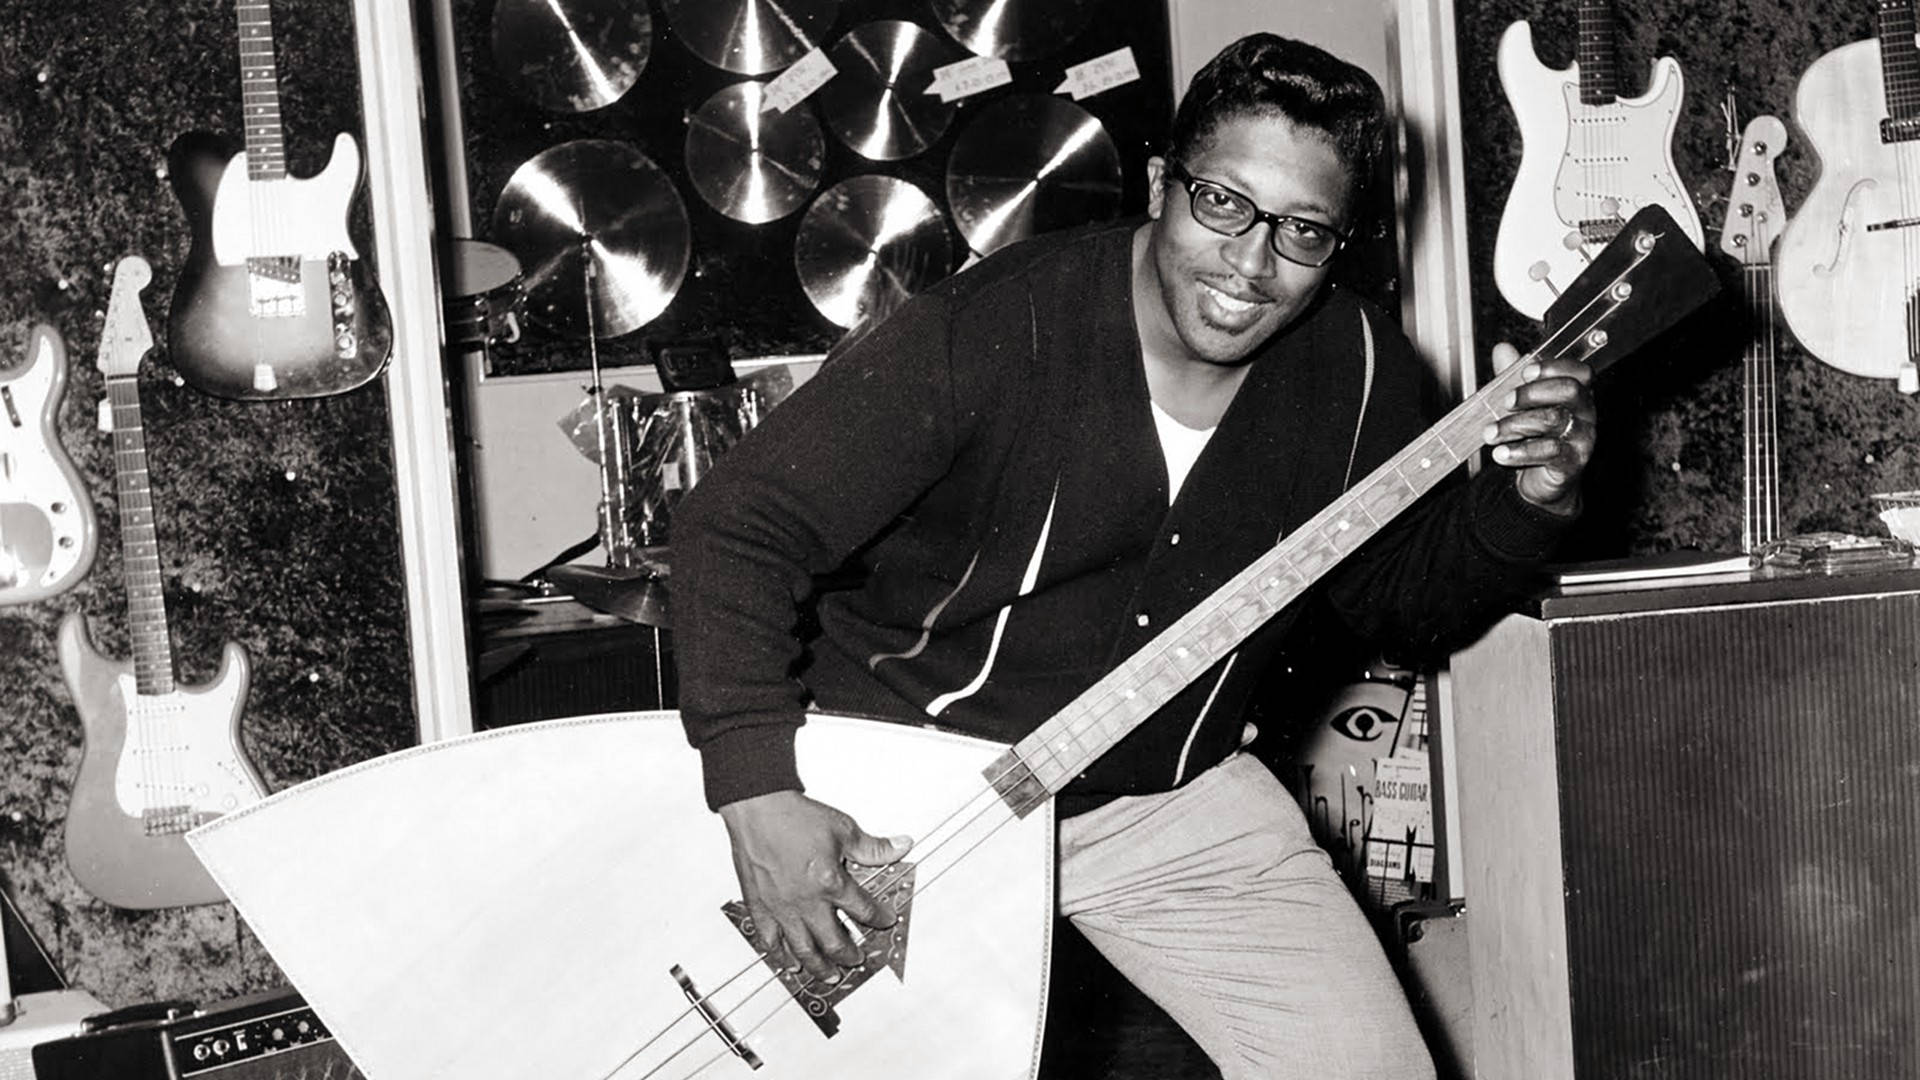 Greyscale Bo Diddley With Big Guitar Wallpaper